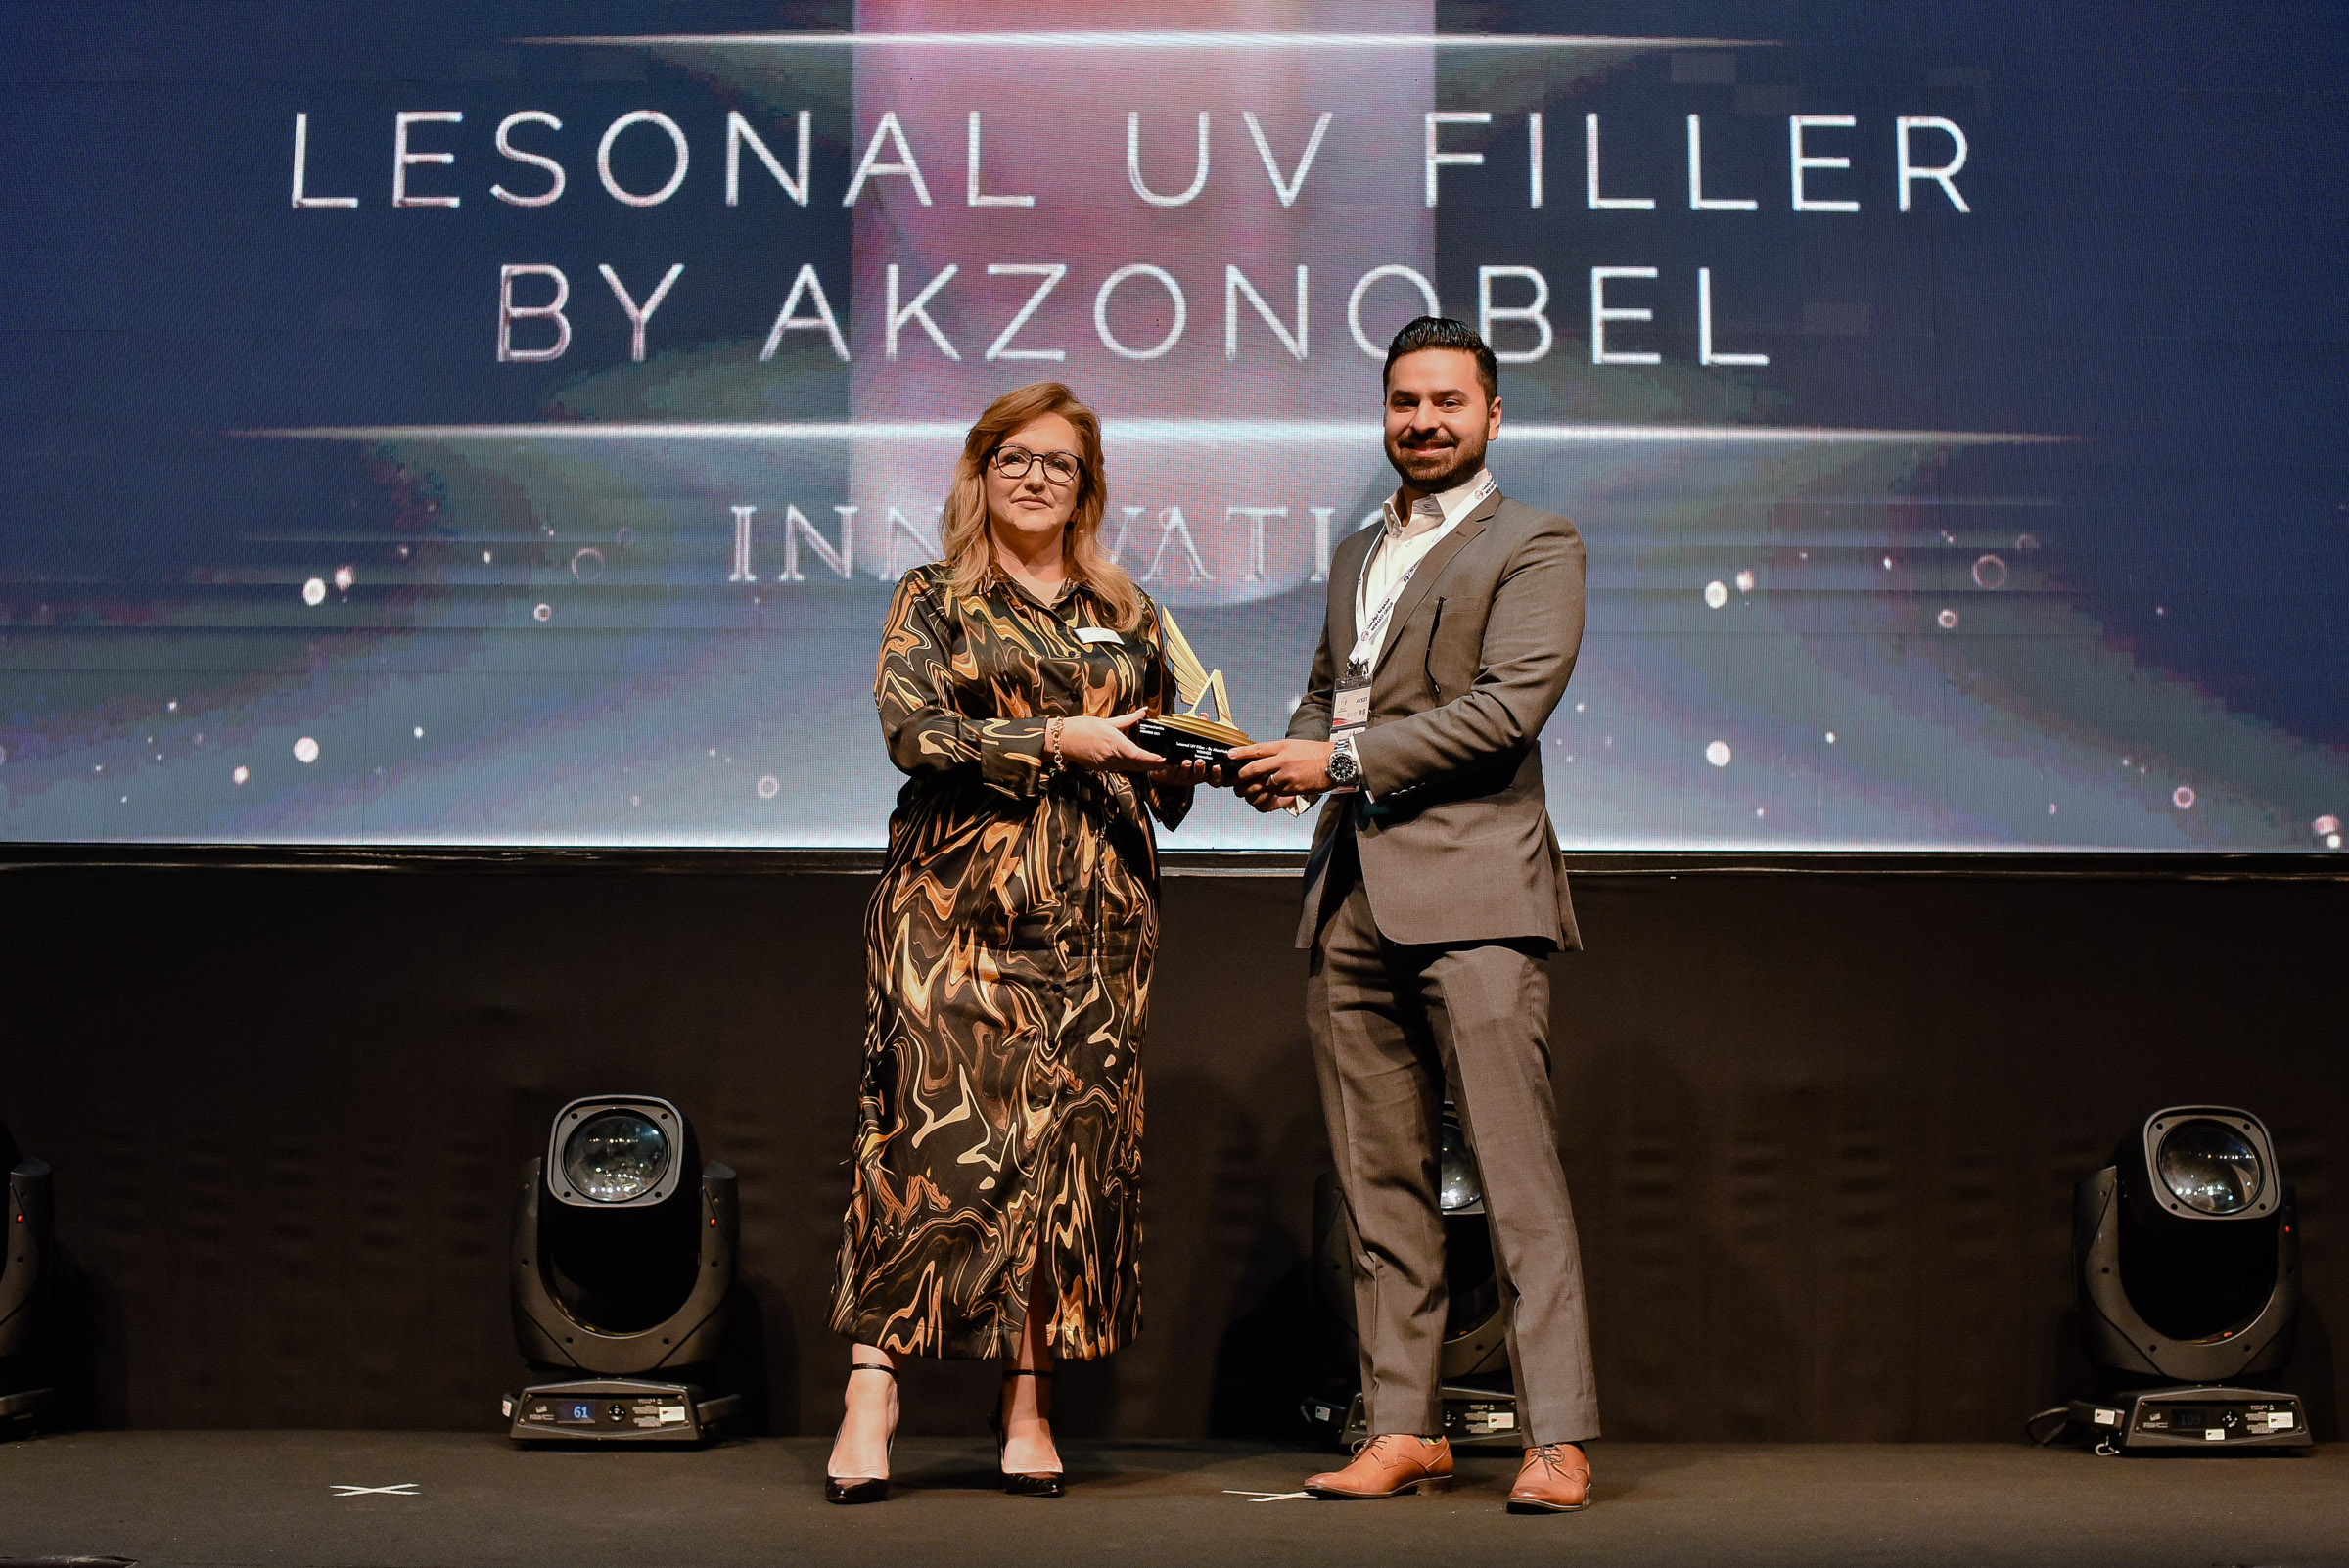 Taking home the Innovation Award was AkzoNobel for their sustainable Les---